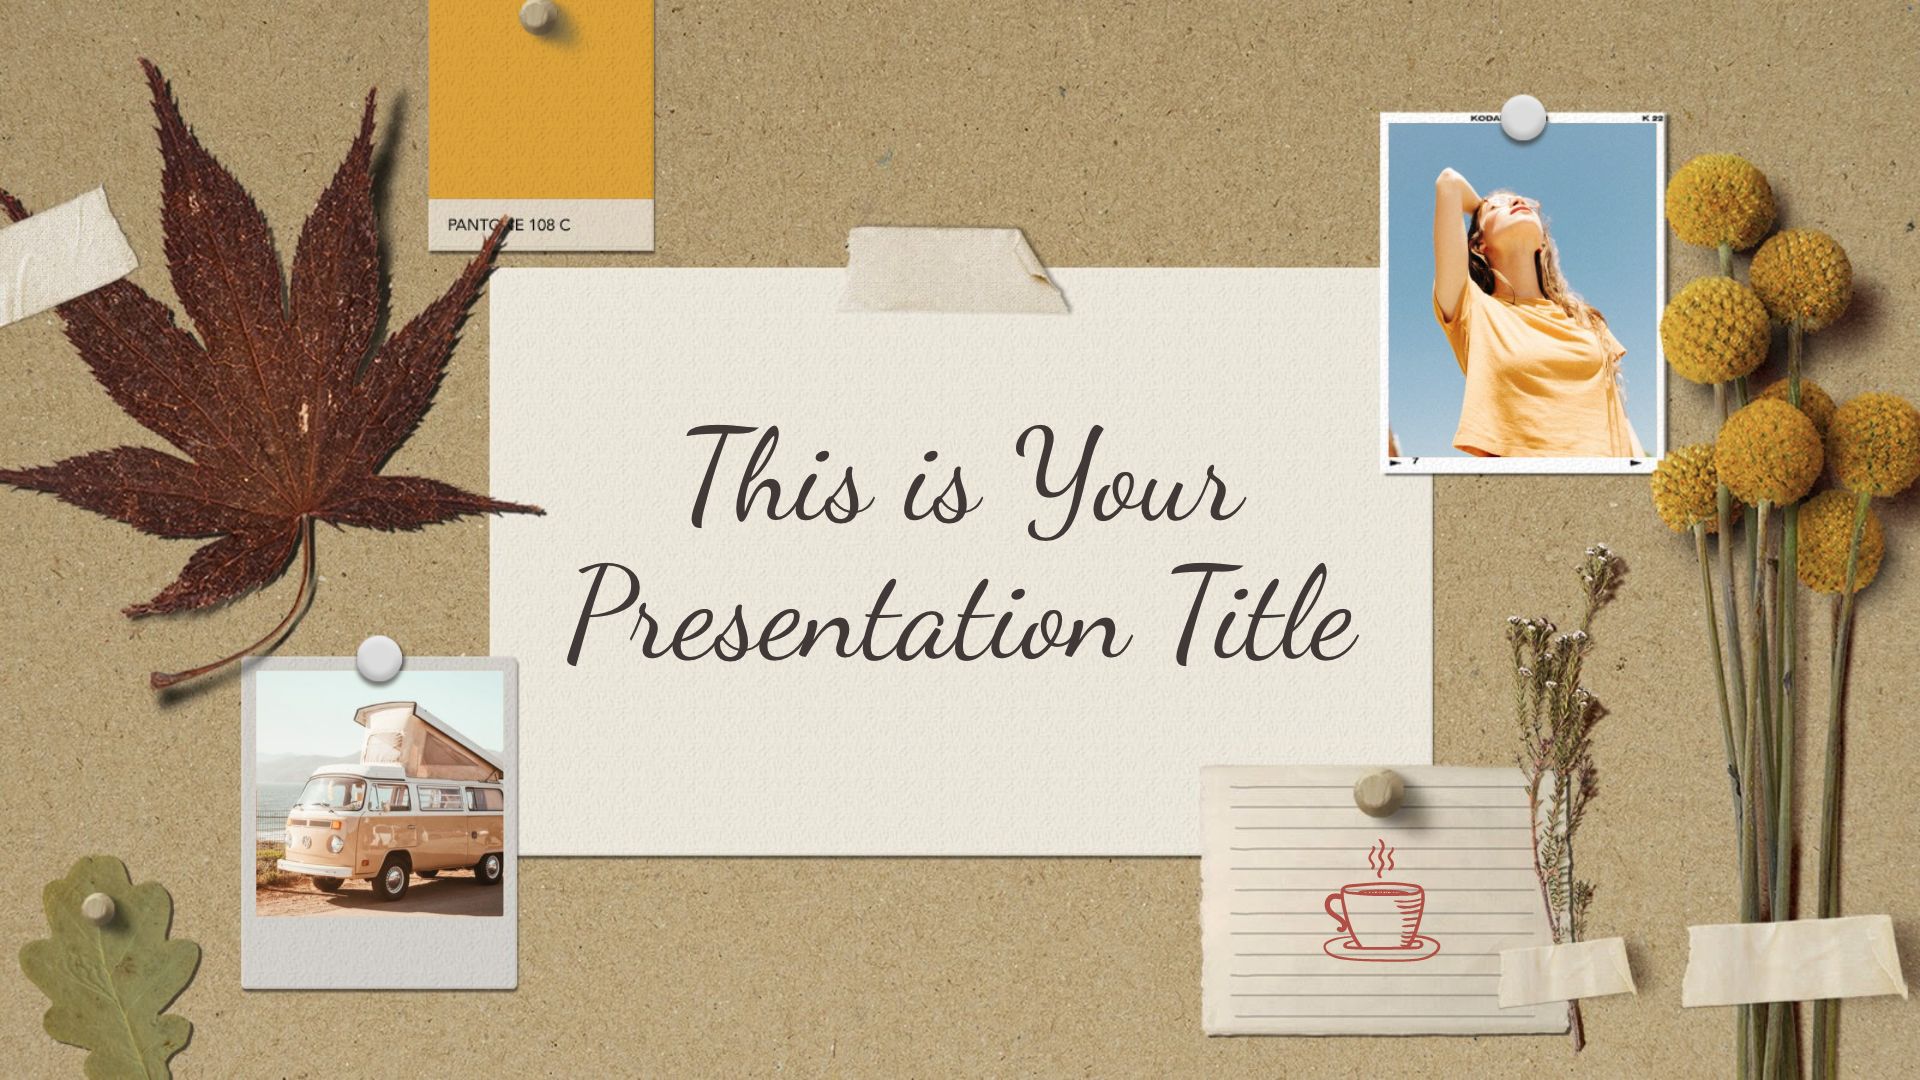 Free Nature PowerPoint templates and Google Slides themes